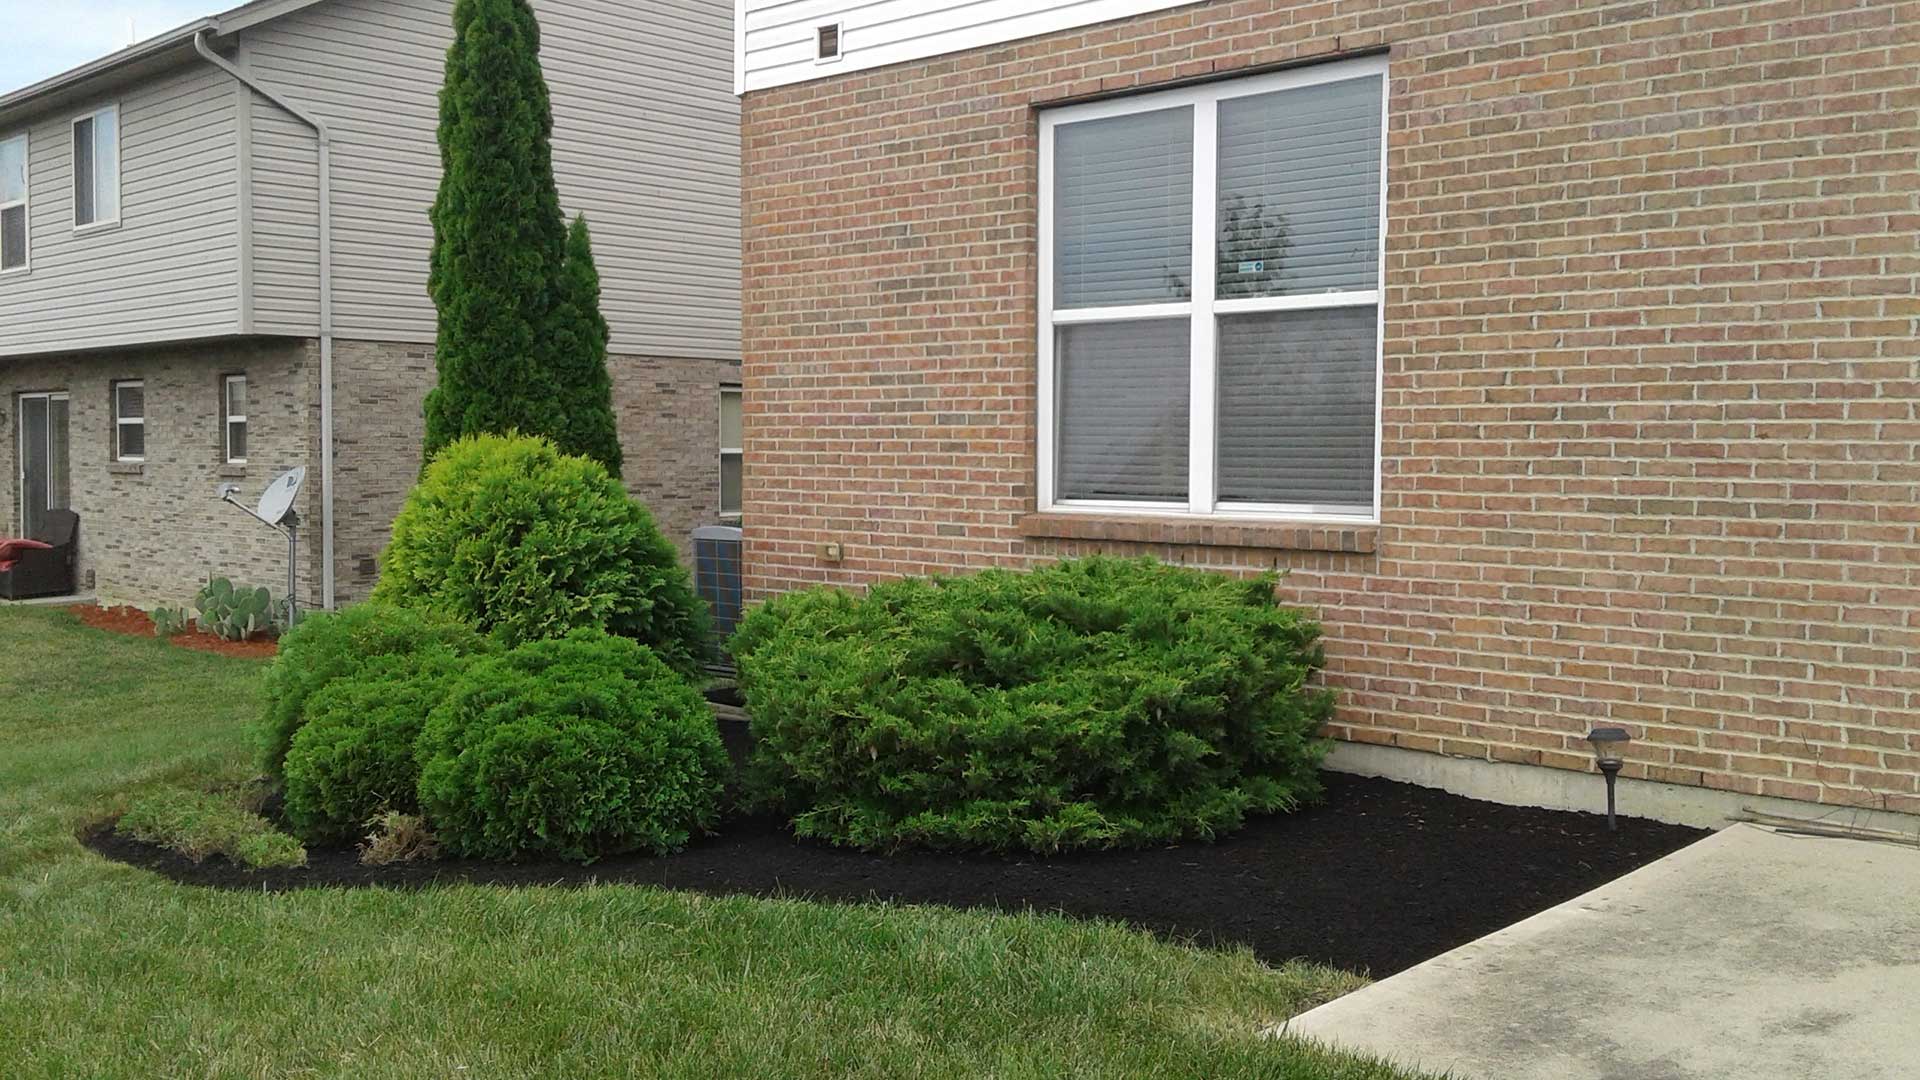 Landscape bed renovated in Mason, OH.